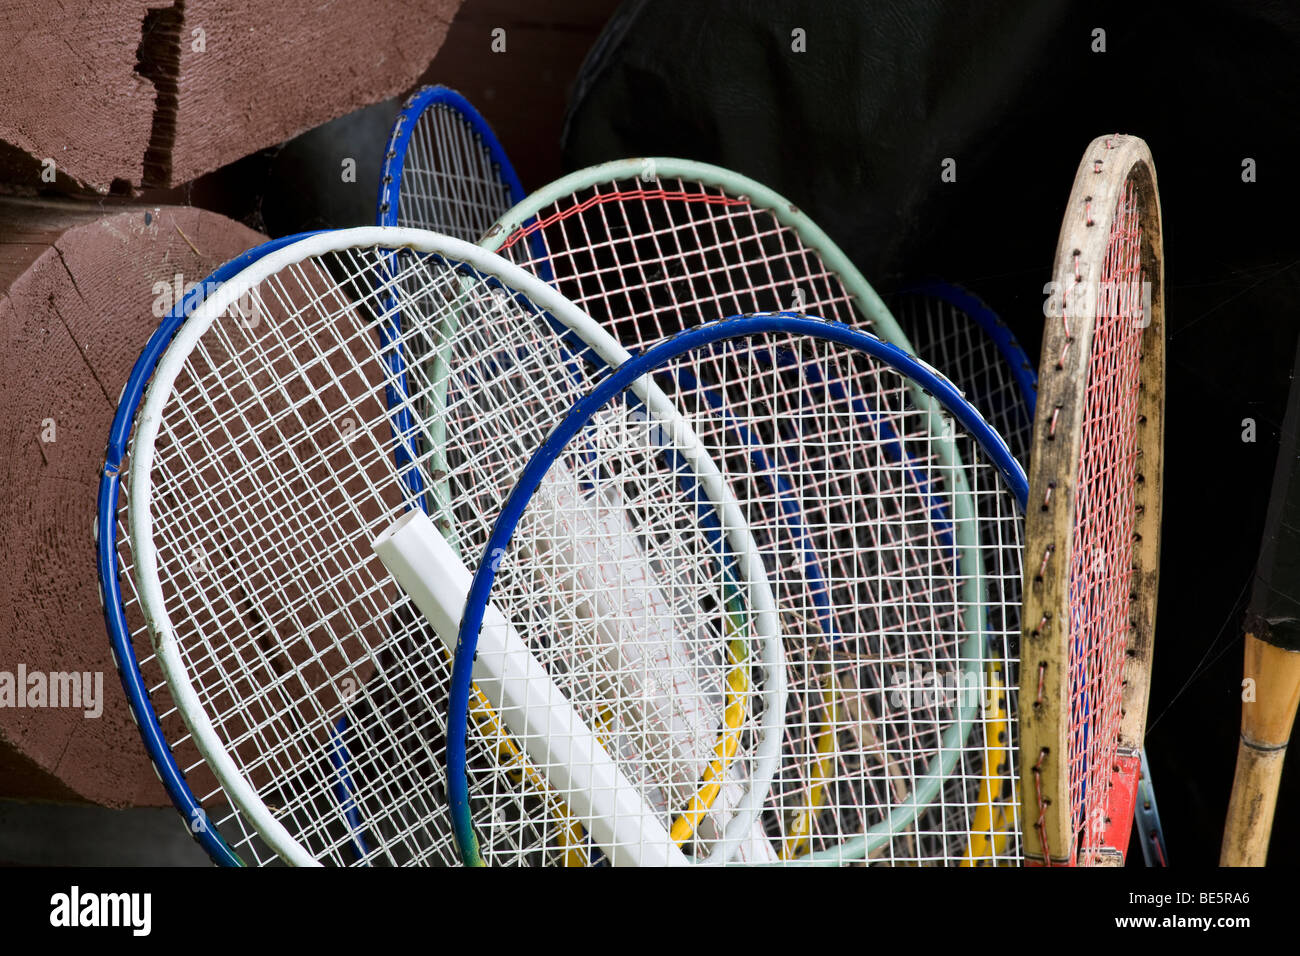 Badminton and Tennis Raquets. A collection of 6 badminton and one tennis raquet against the logs of a summer cottage or cabin. Stock Photo